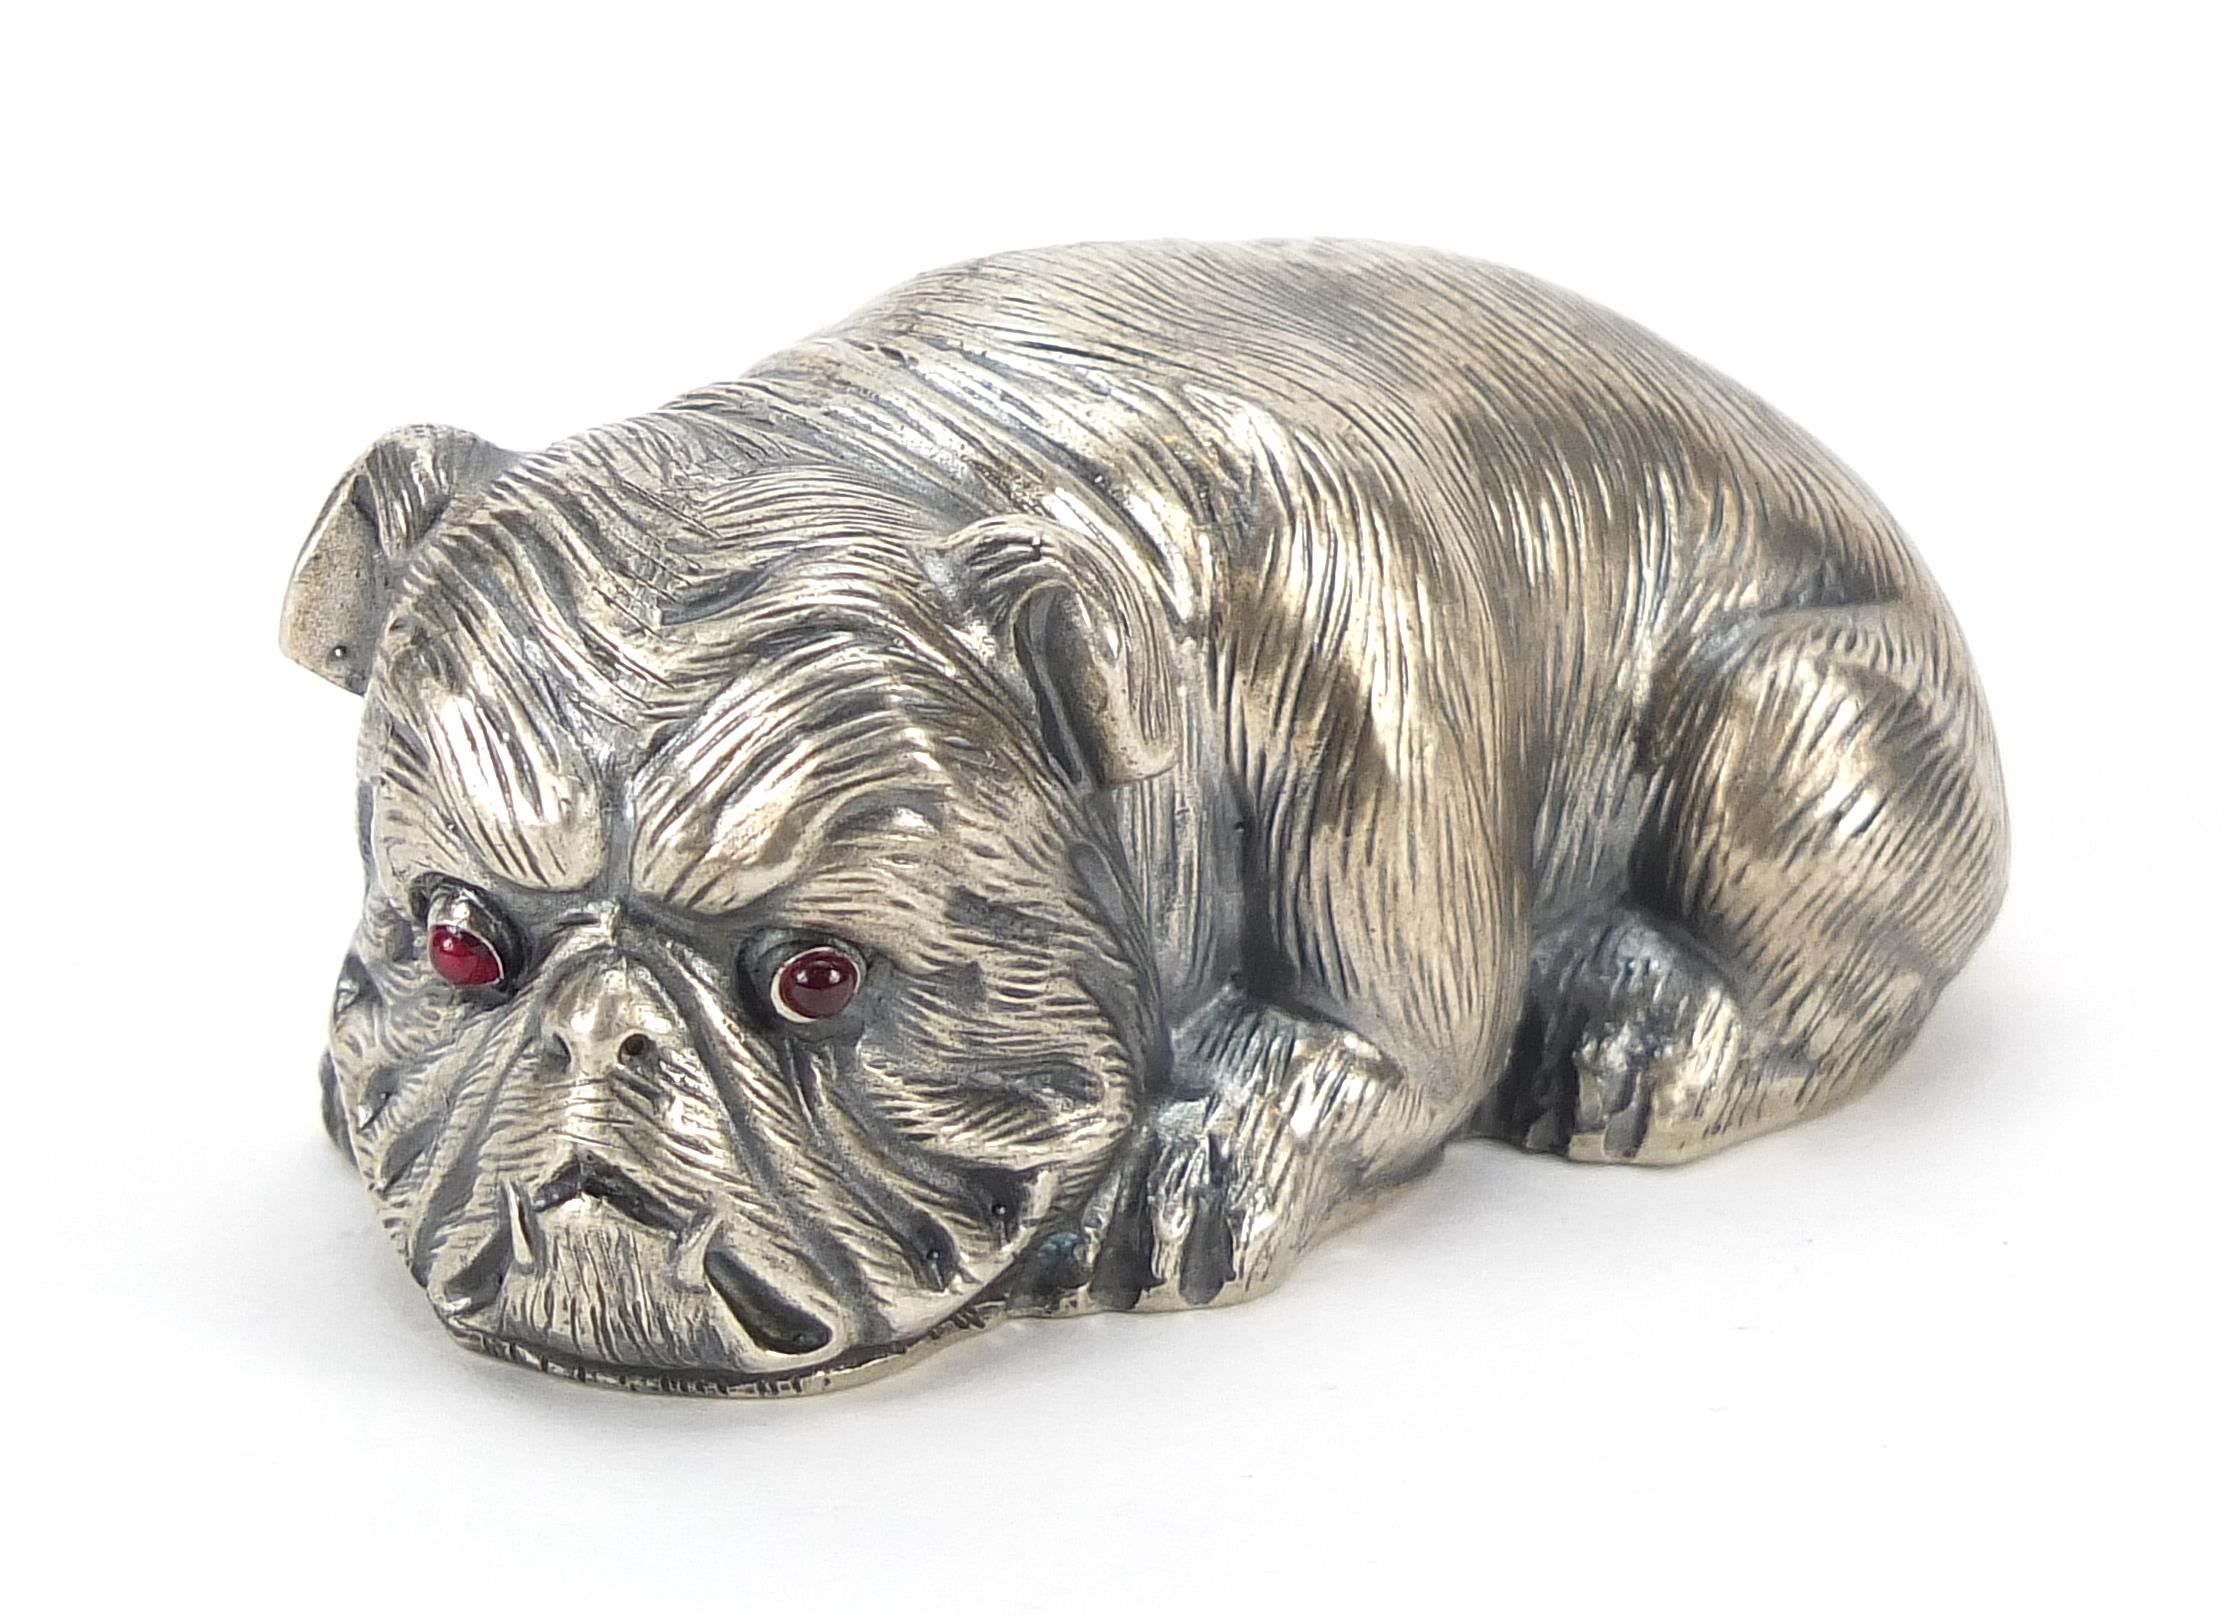 Silver English Bulldog paperweight with ruby eyes, impressed Russian marks to the base, 6.5cm